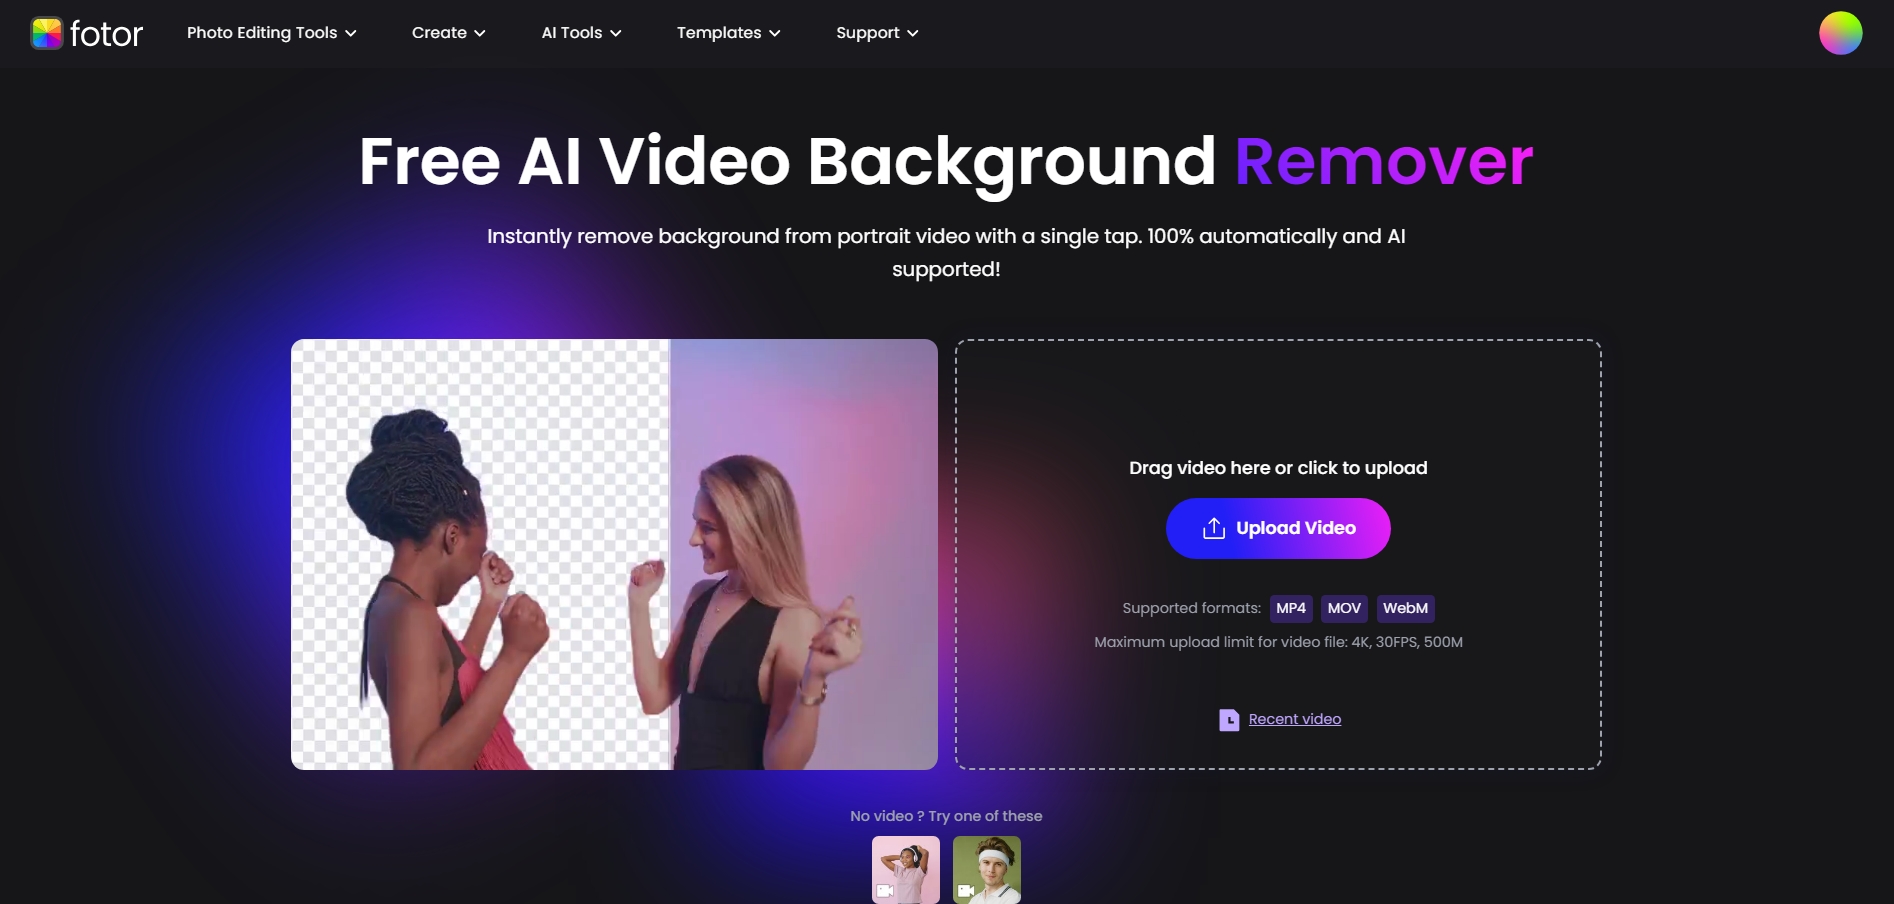 ai video background remover from fotor